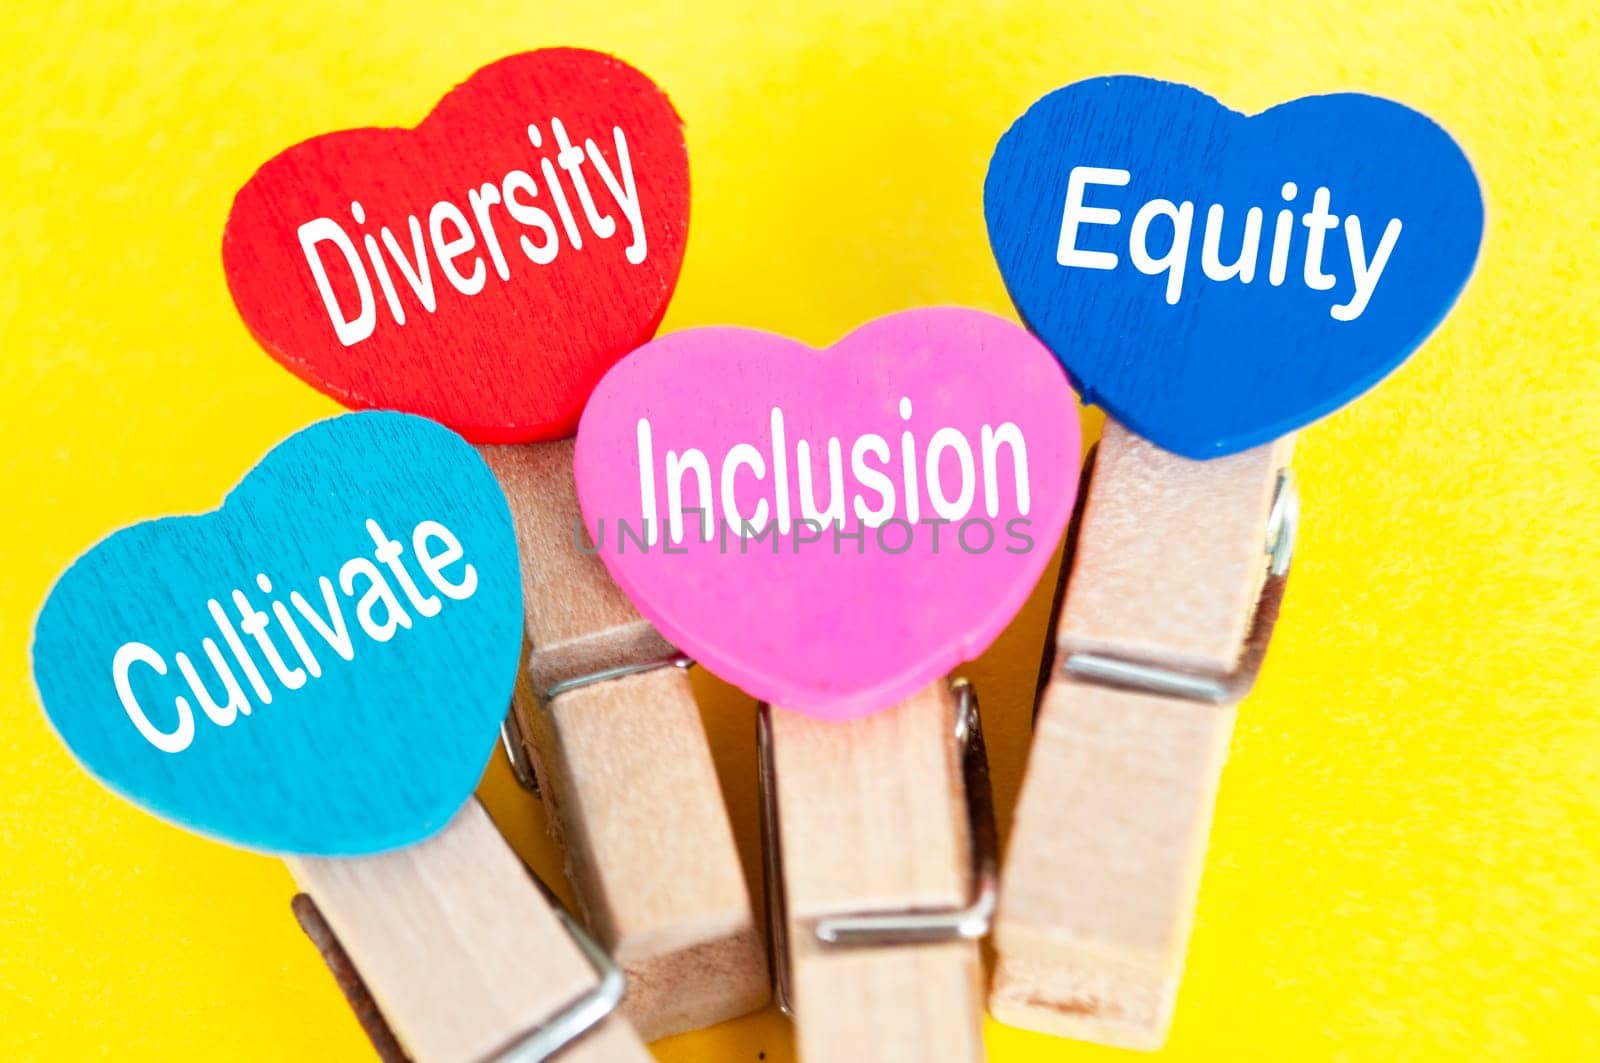 Cultivate diversity, inclusion and equity on yellow background